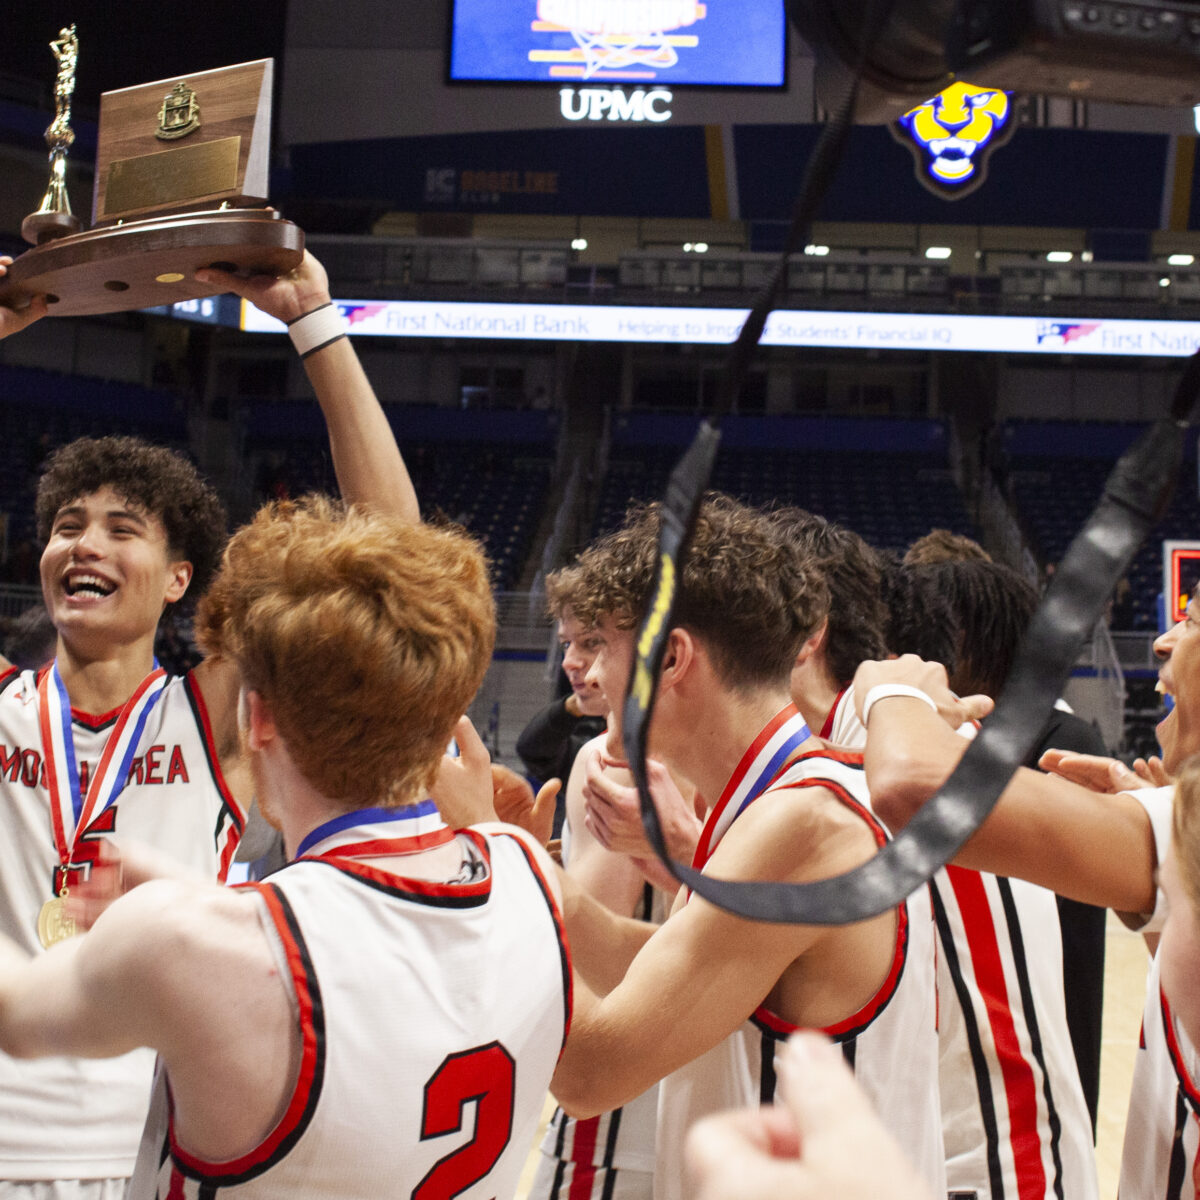 WPIAL Class 5A boys basketball championship: Michael Santicola’s fourth-quarter 3’s deliver Moon a fifth WPIAL title after rallying from 10 points down to beat Franklin Regional